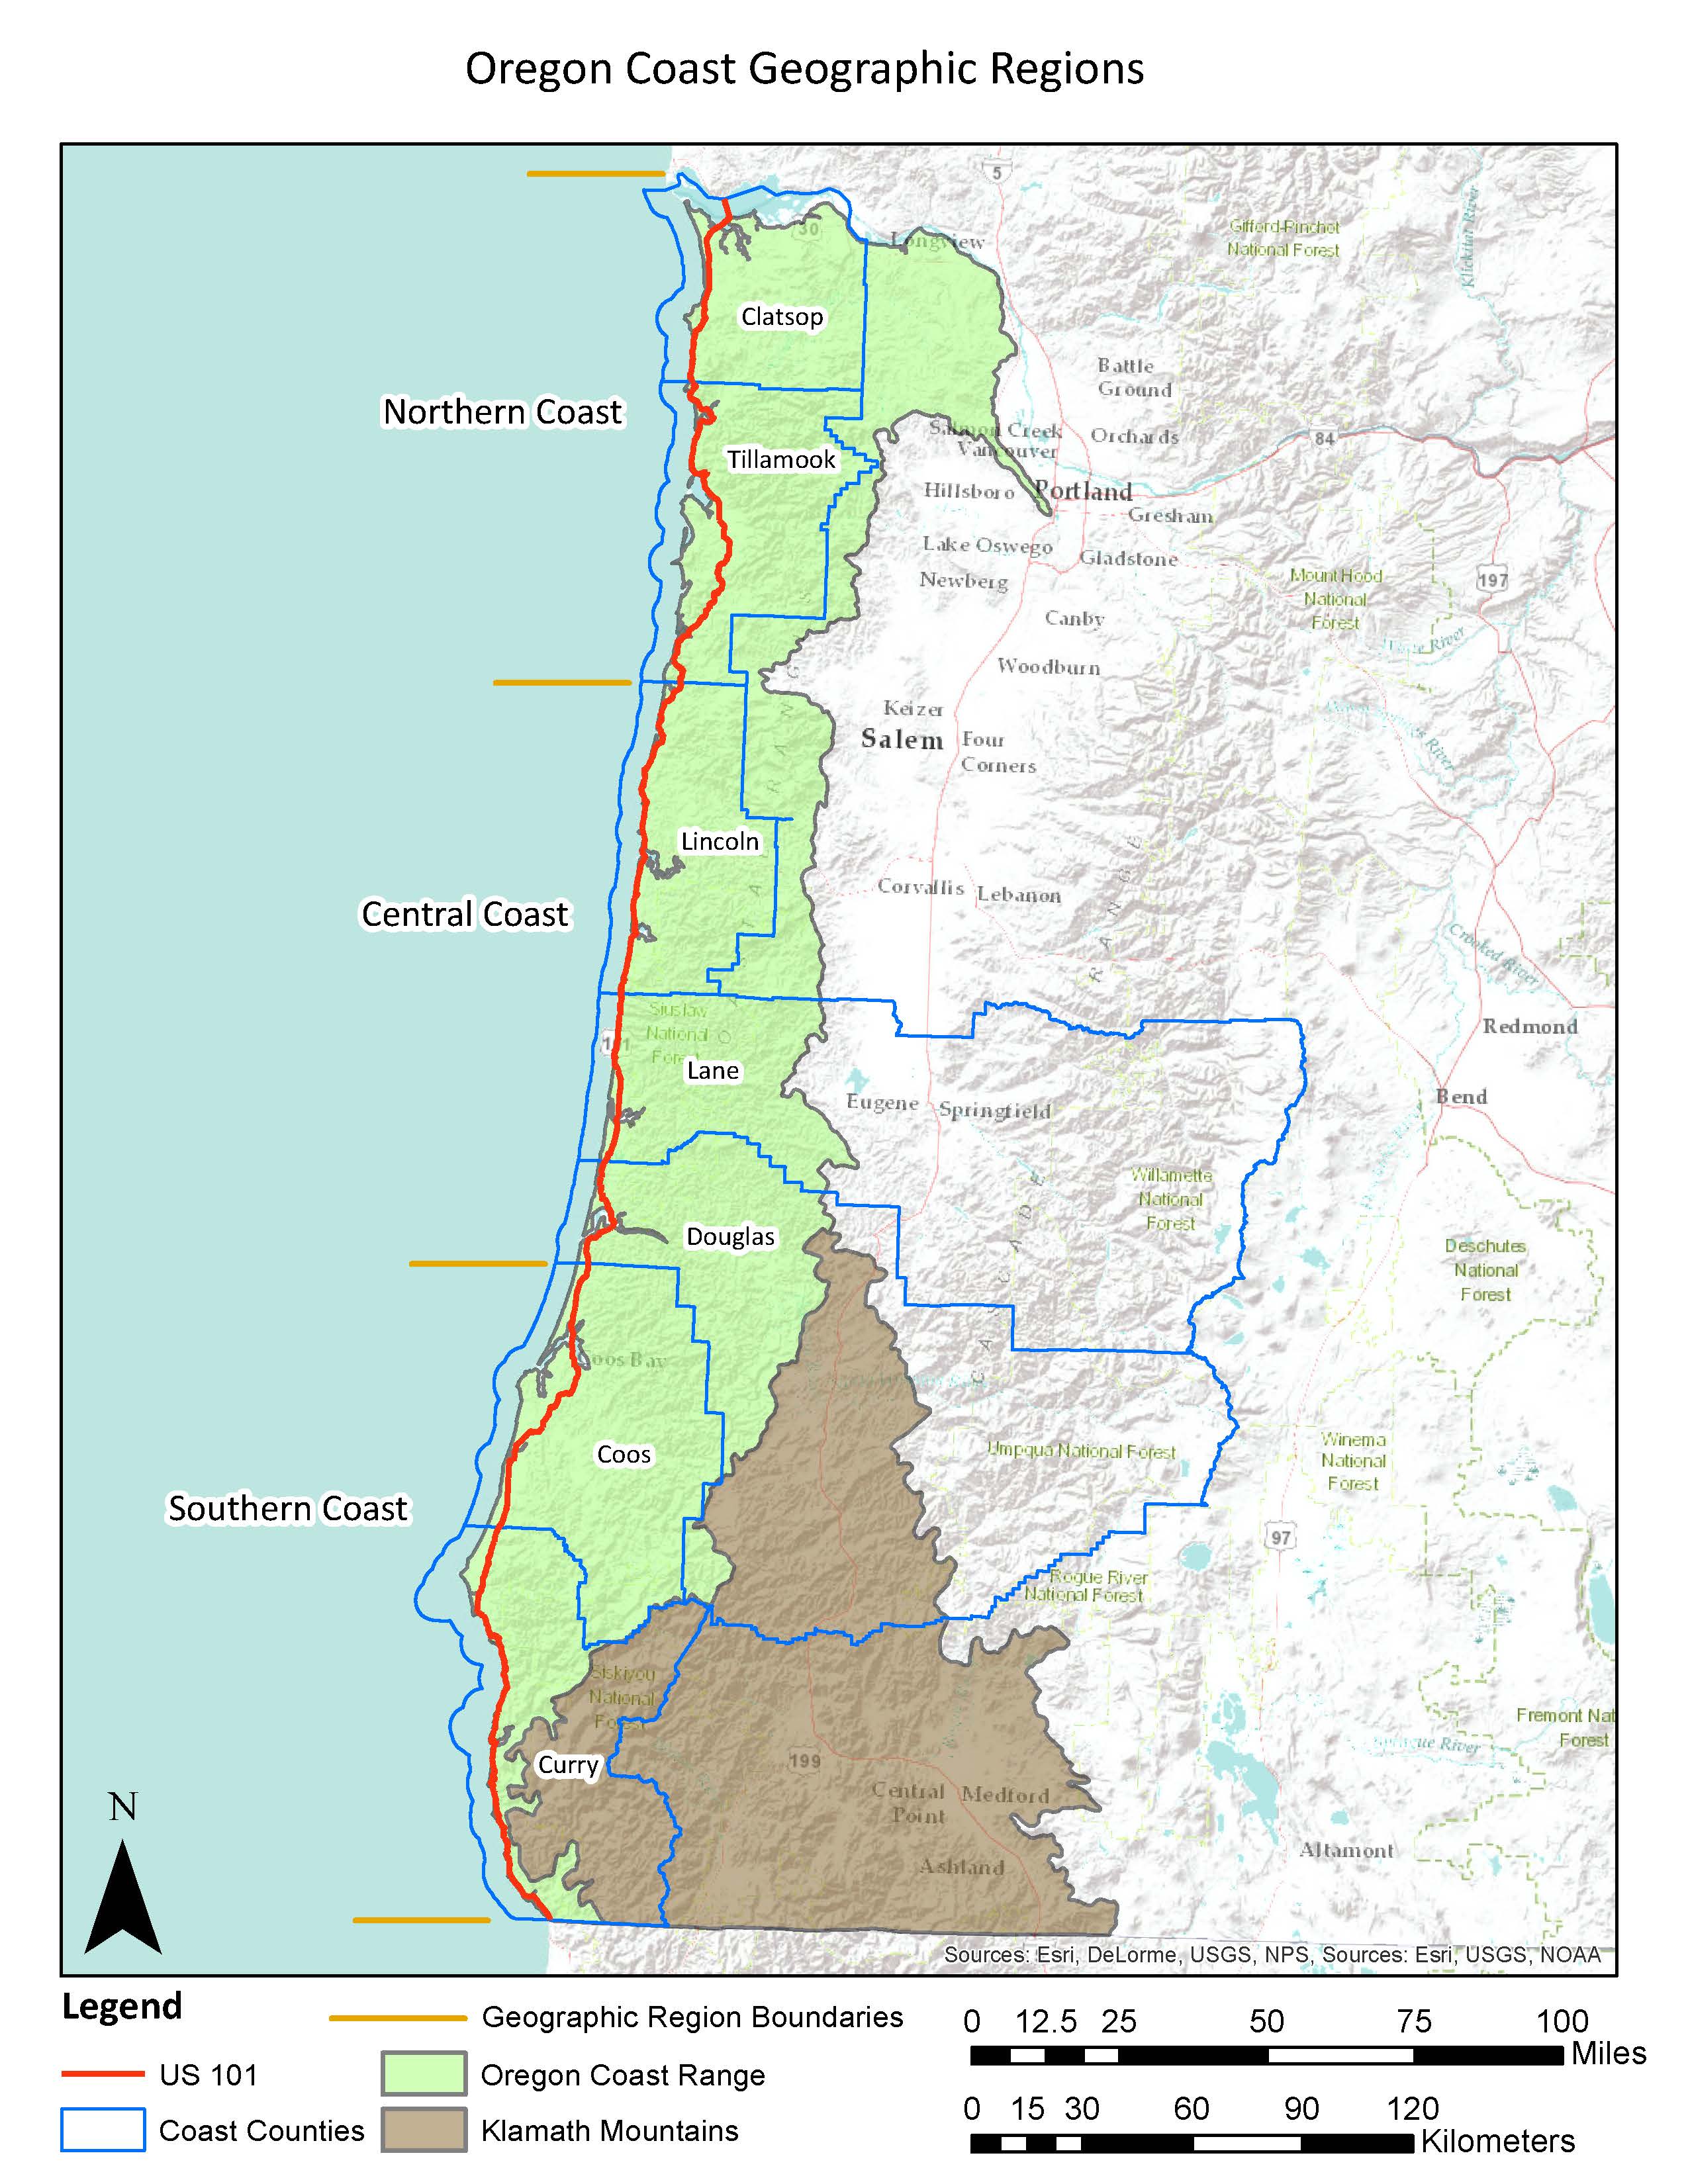 k:\25698127_sealionpoint_hwy101context\export\geographicregions_2.jpg